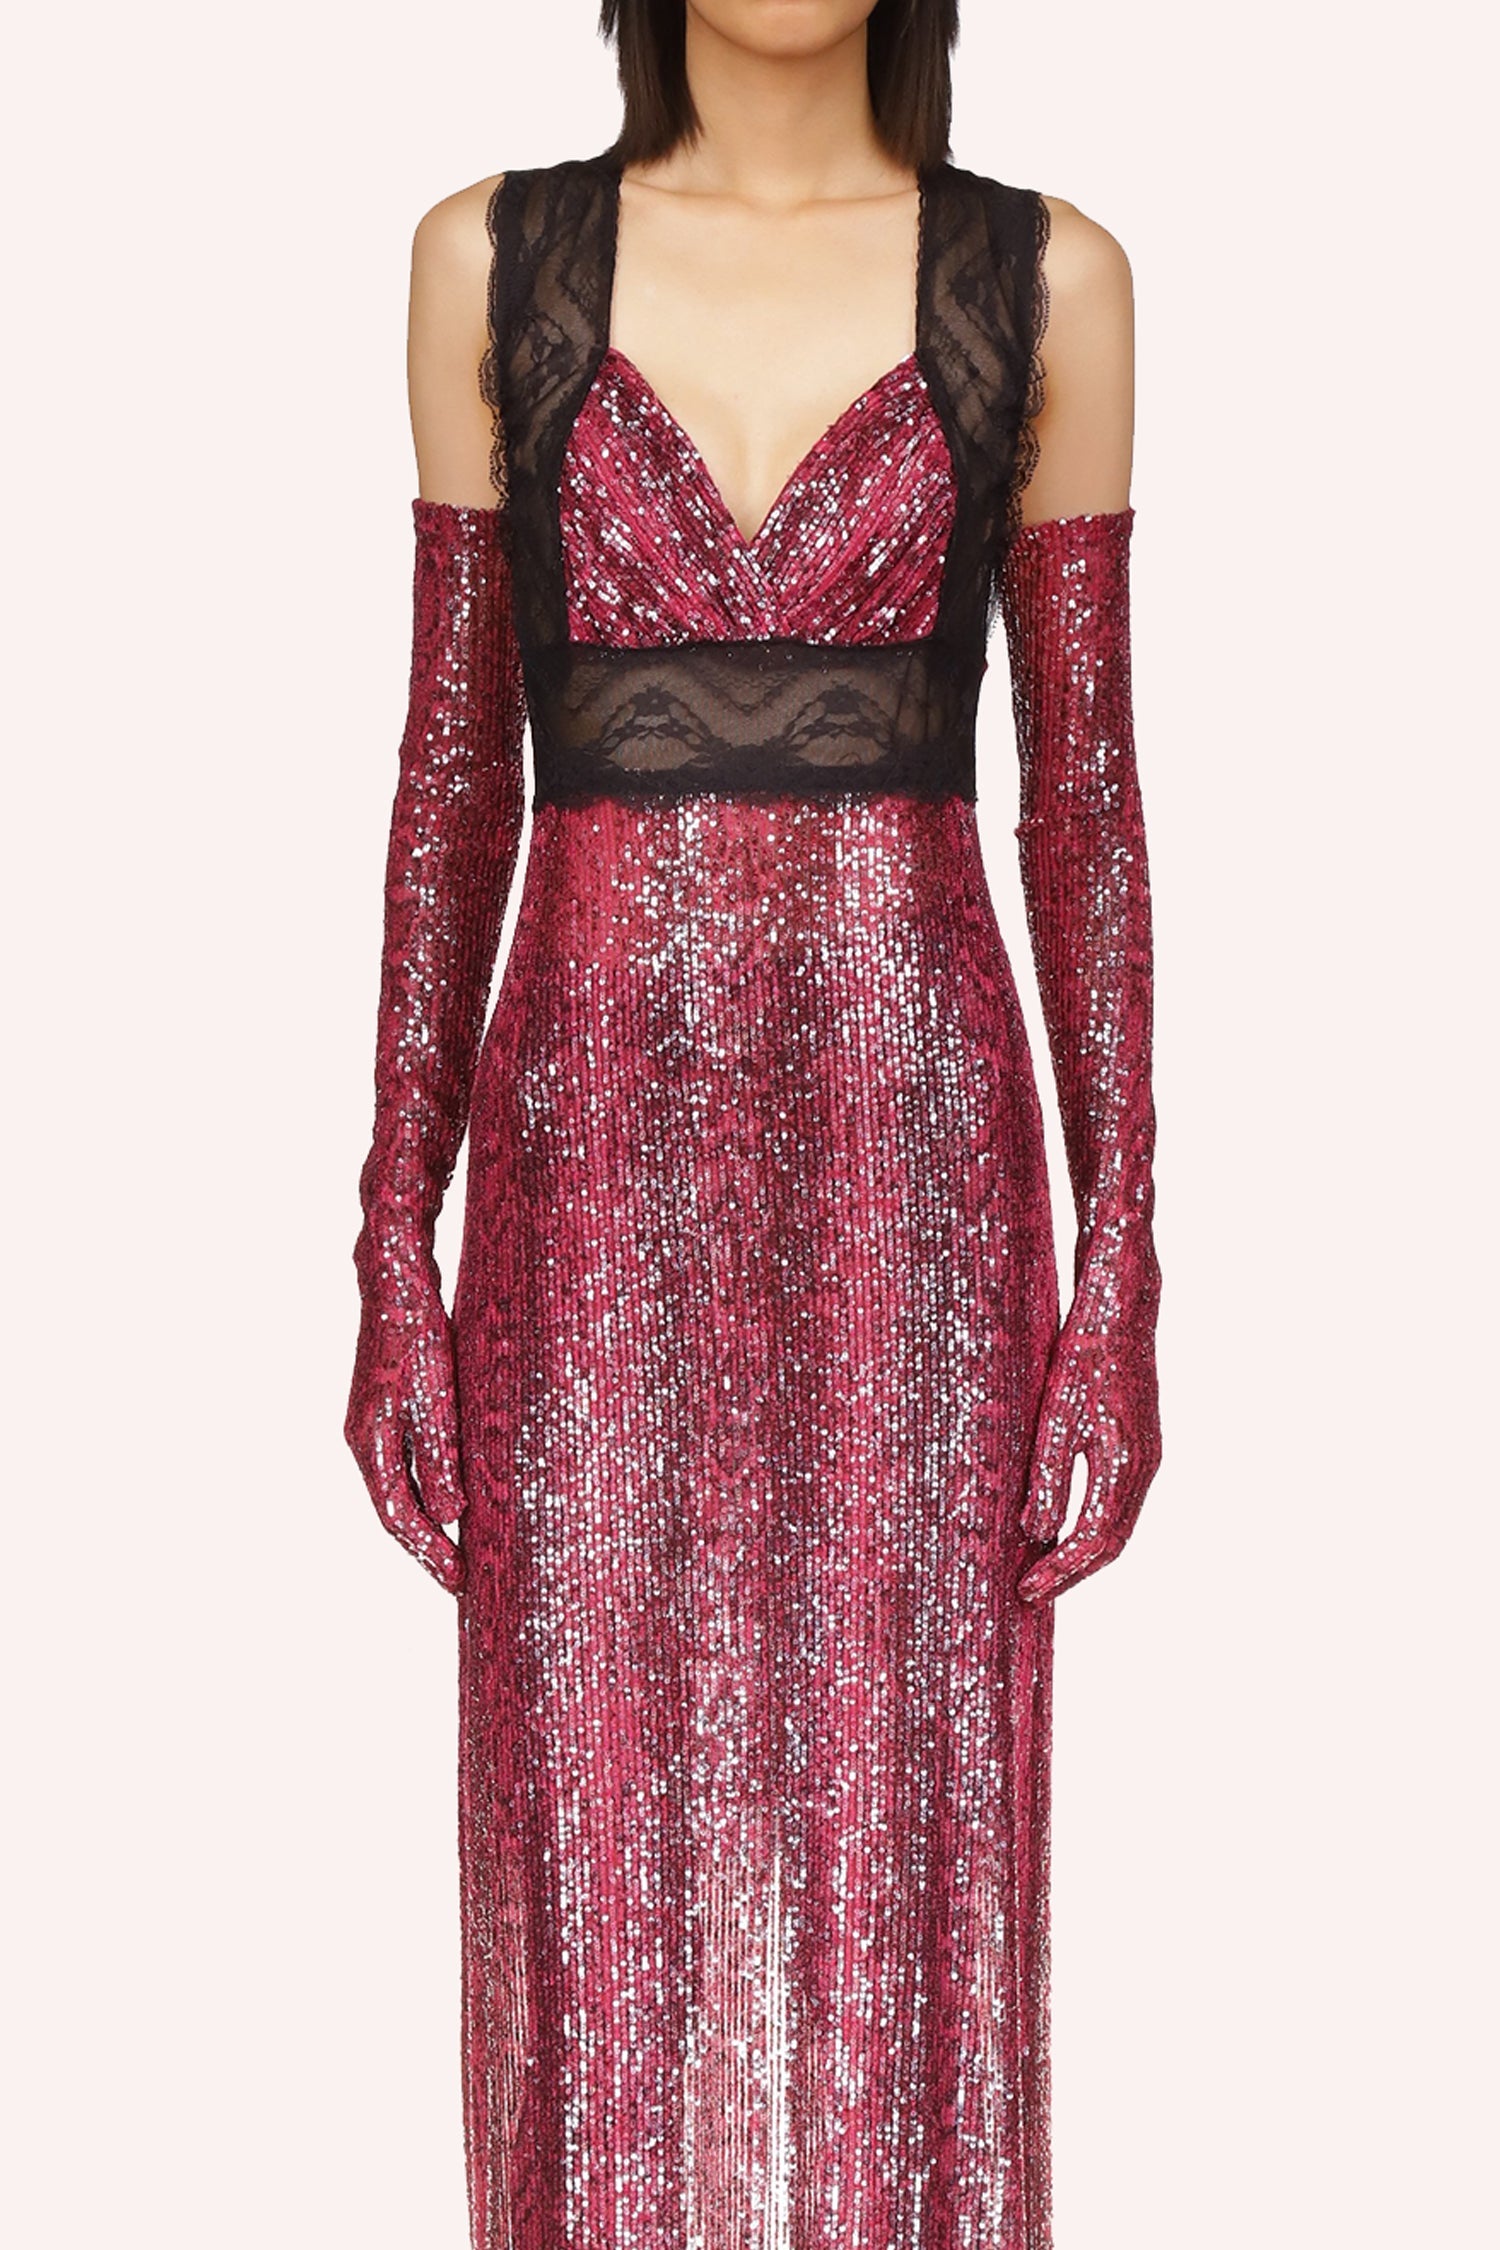 Red Snakeskin Dress as a large see-through black lace under the bust pass over the shoulders